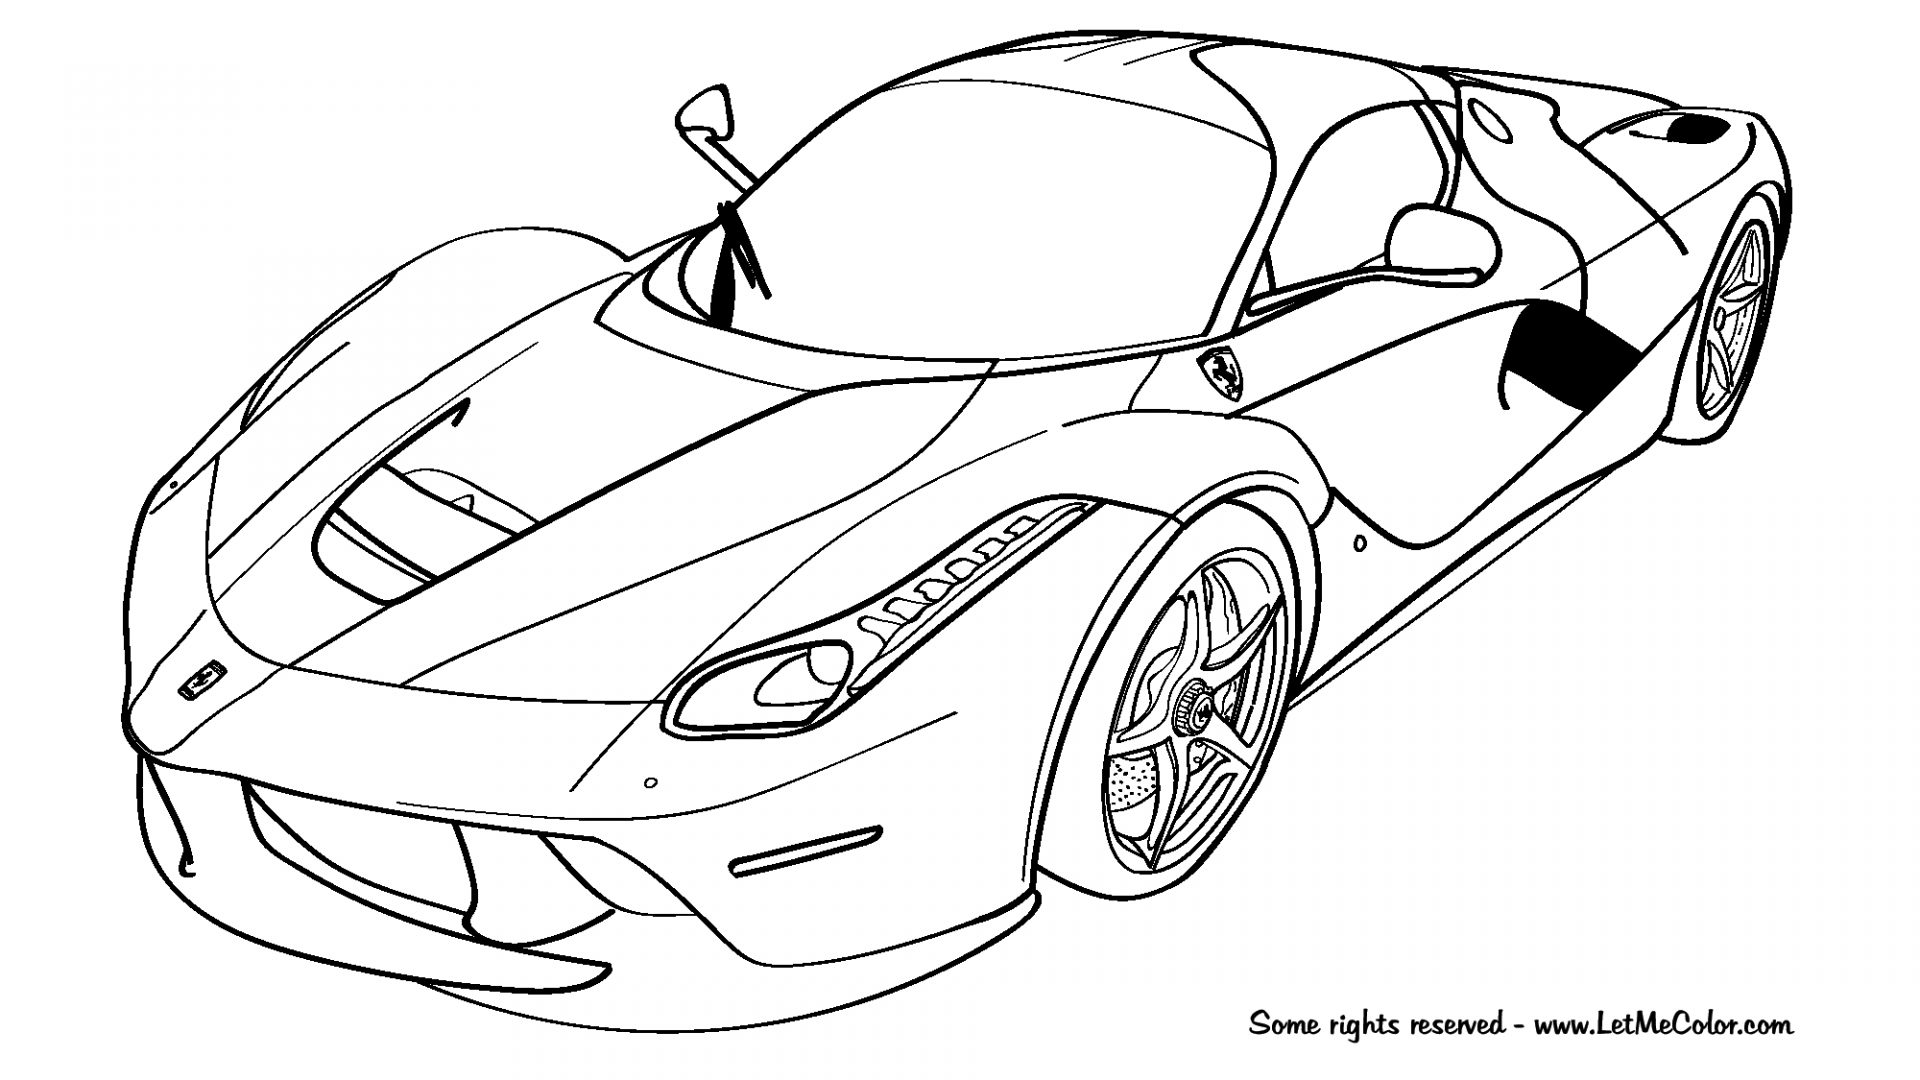 corvette-coloring-pages-at-getcolorings-free-printable-colorings-pages-to-print-and-color